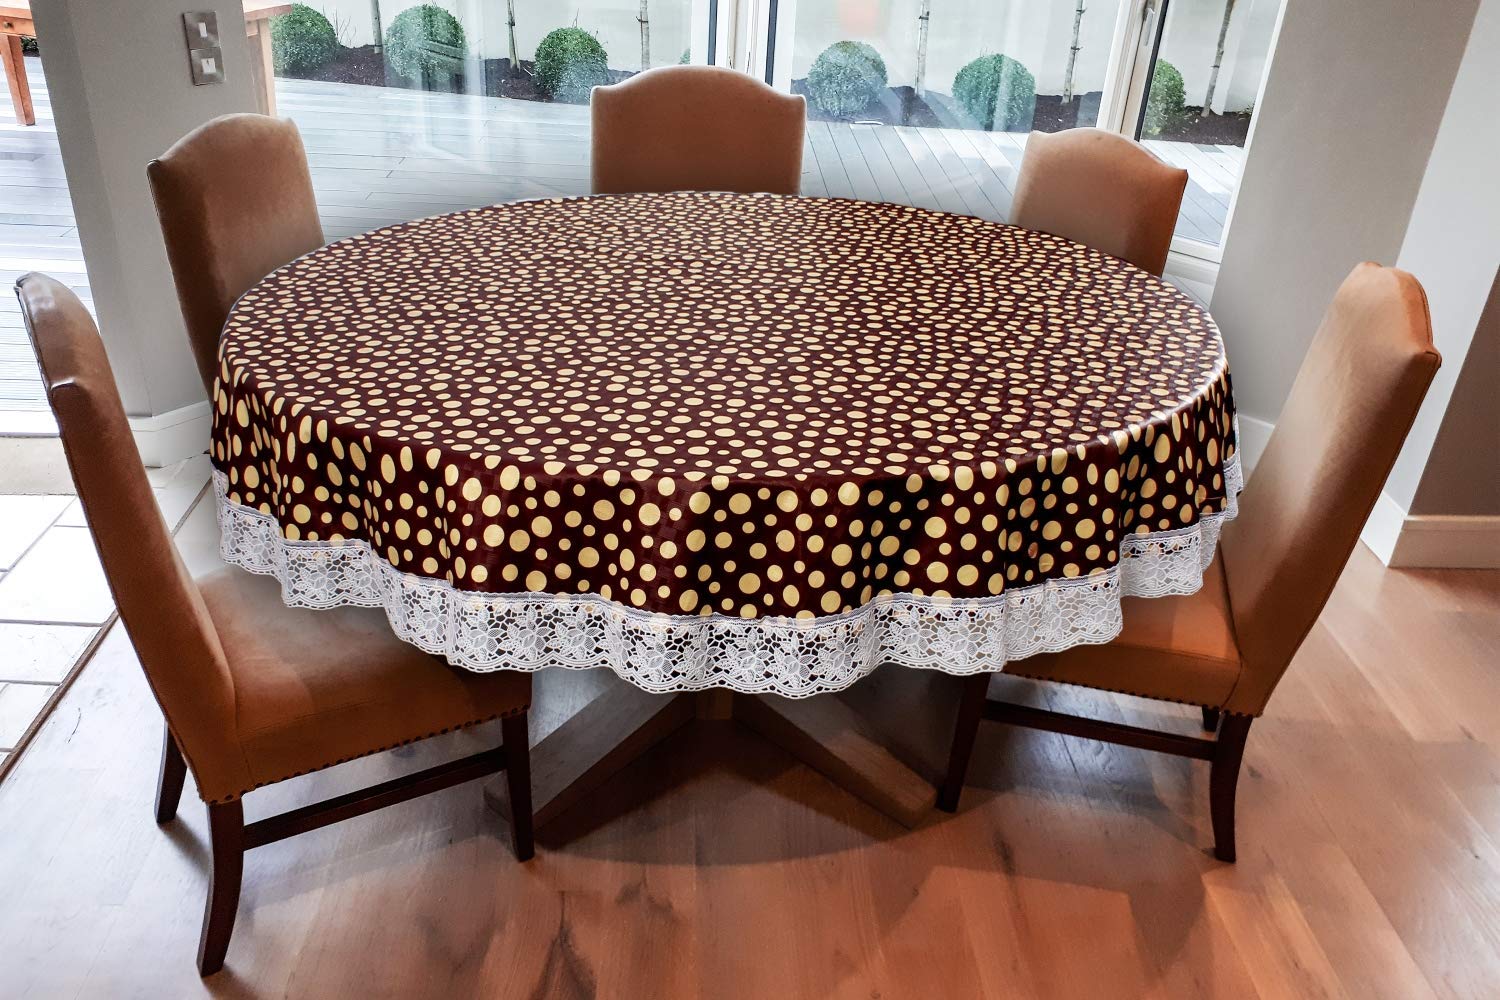 What Size Of Tablecloth Is Needed For A 72-Inch Round Table?